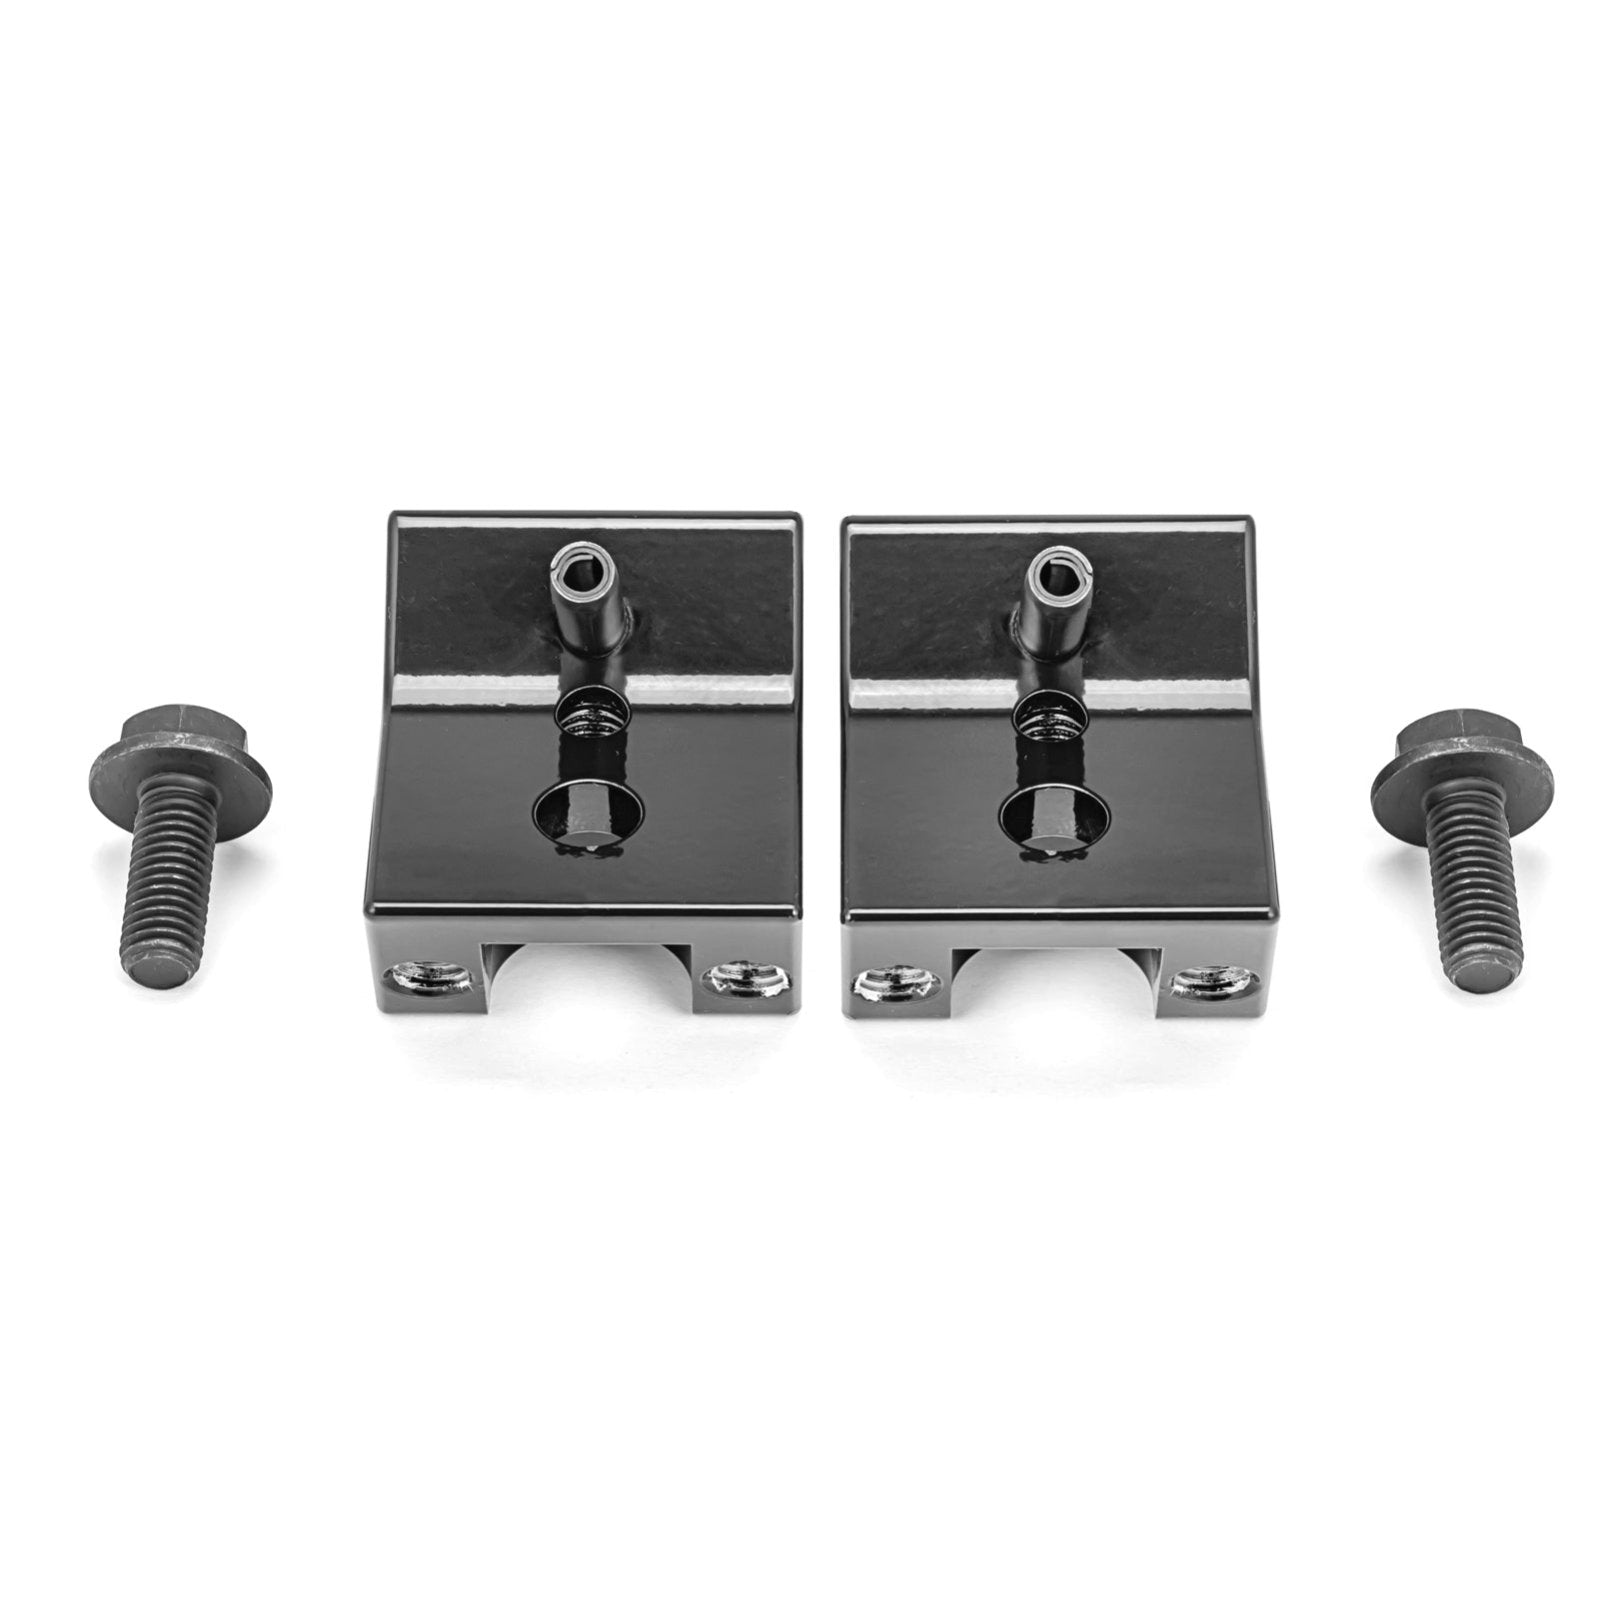 Weisen Toyota Tacoma/4Runner/Tundra & Lexus GX Seat Riser Spacers Lift Kit Front & Rear of Seat